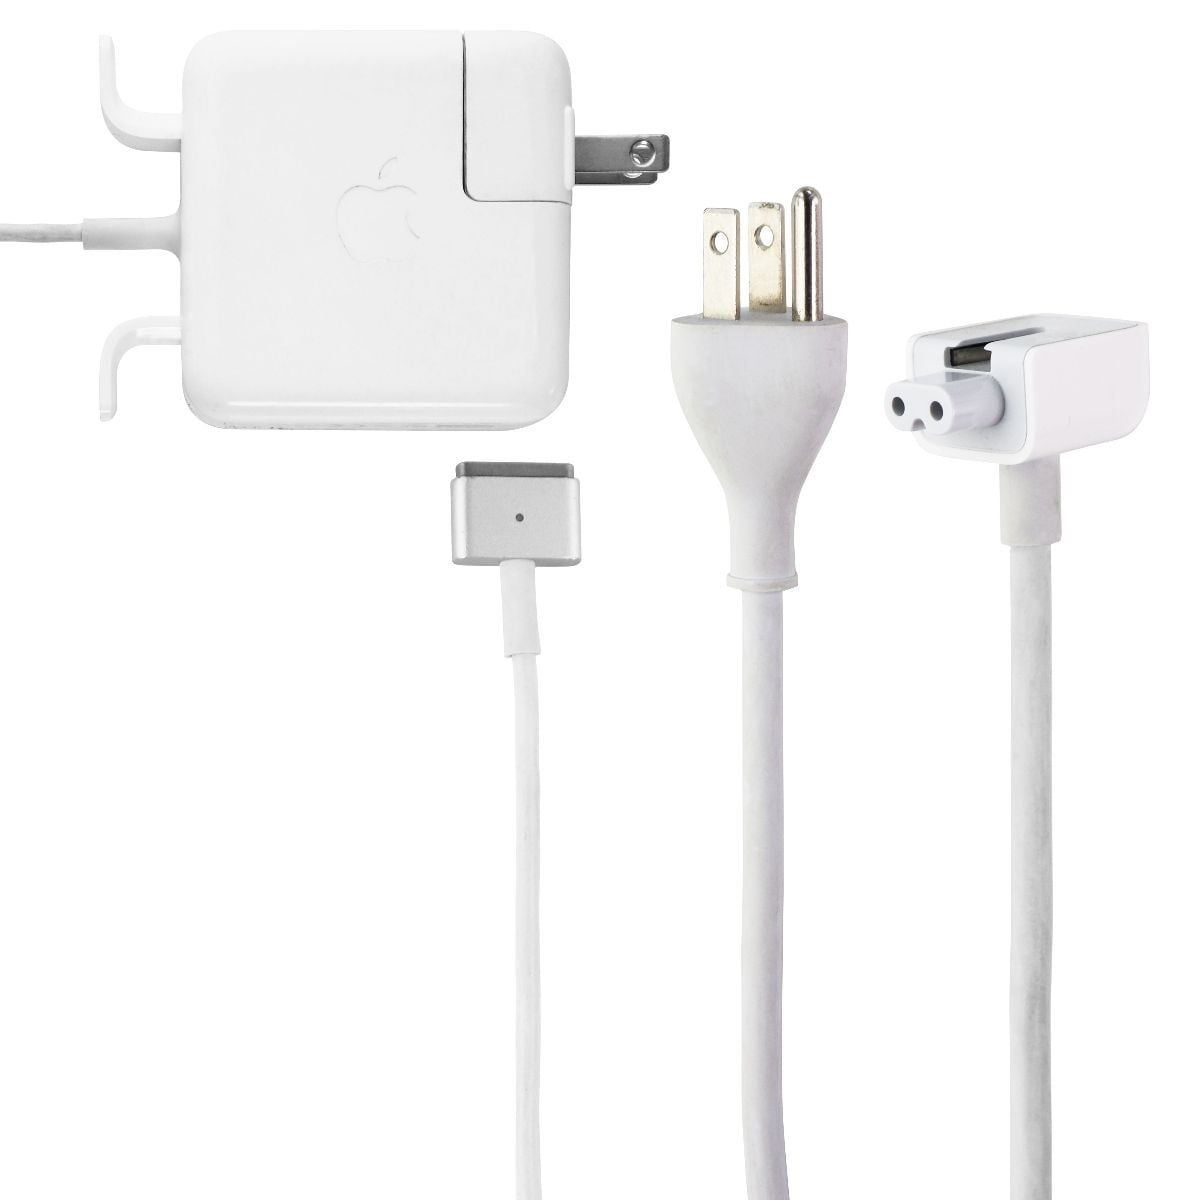 Apple MagSafe Charger - Micro Center